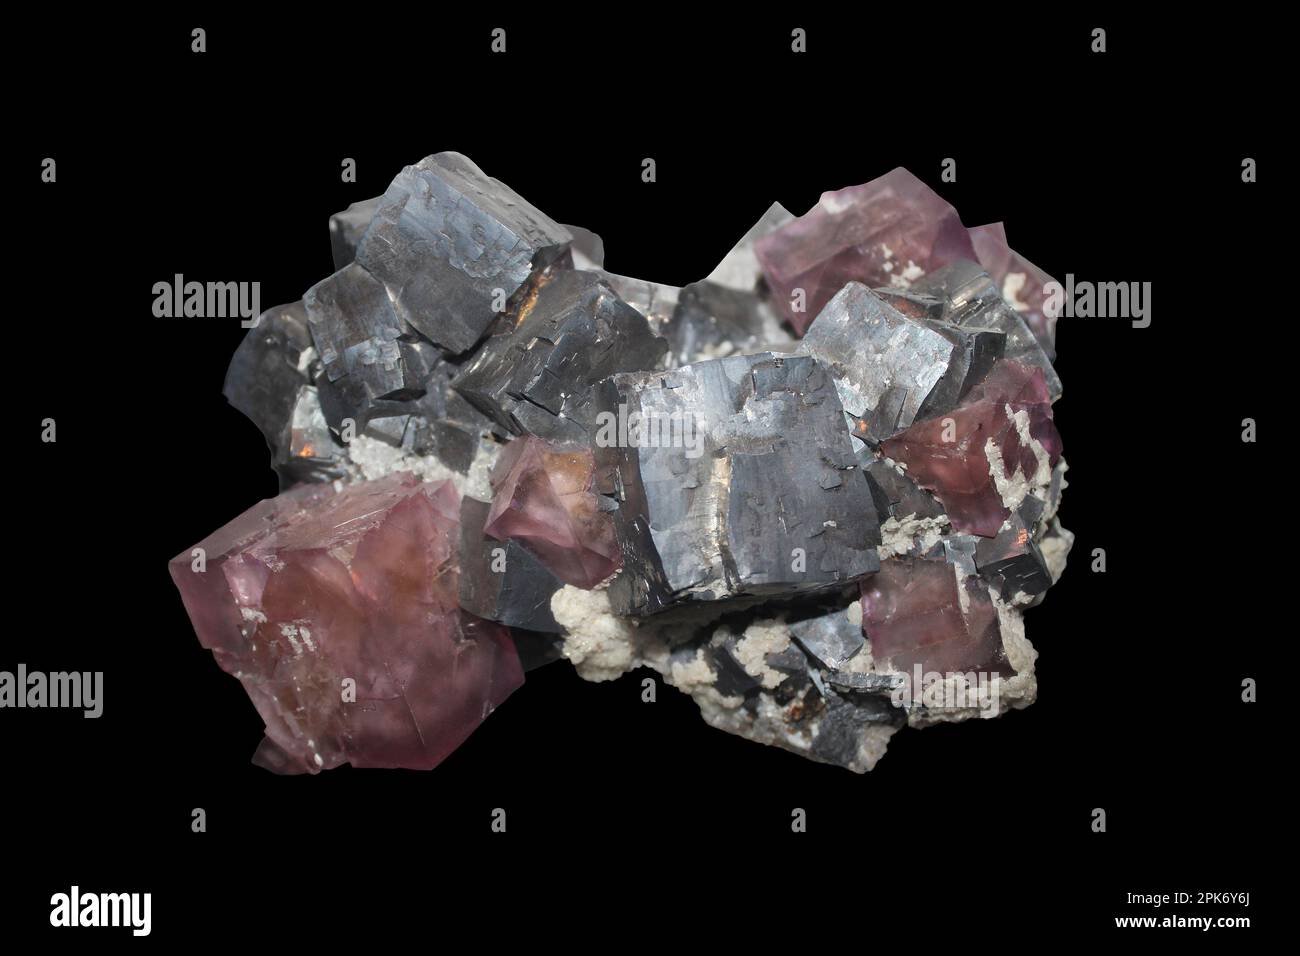 Composite Grey Cubic Crystals Of Galena With Purple Cubic Crystals Of Fluorite Stock Photo